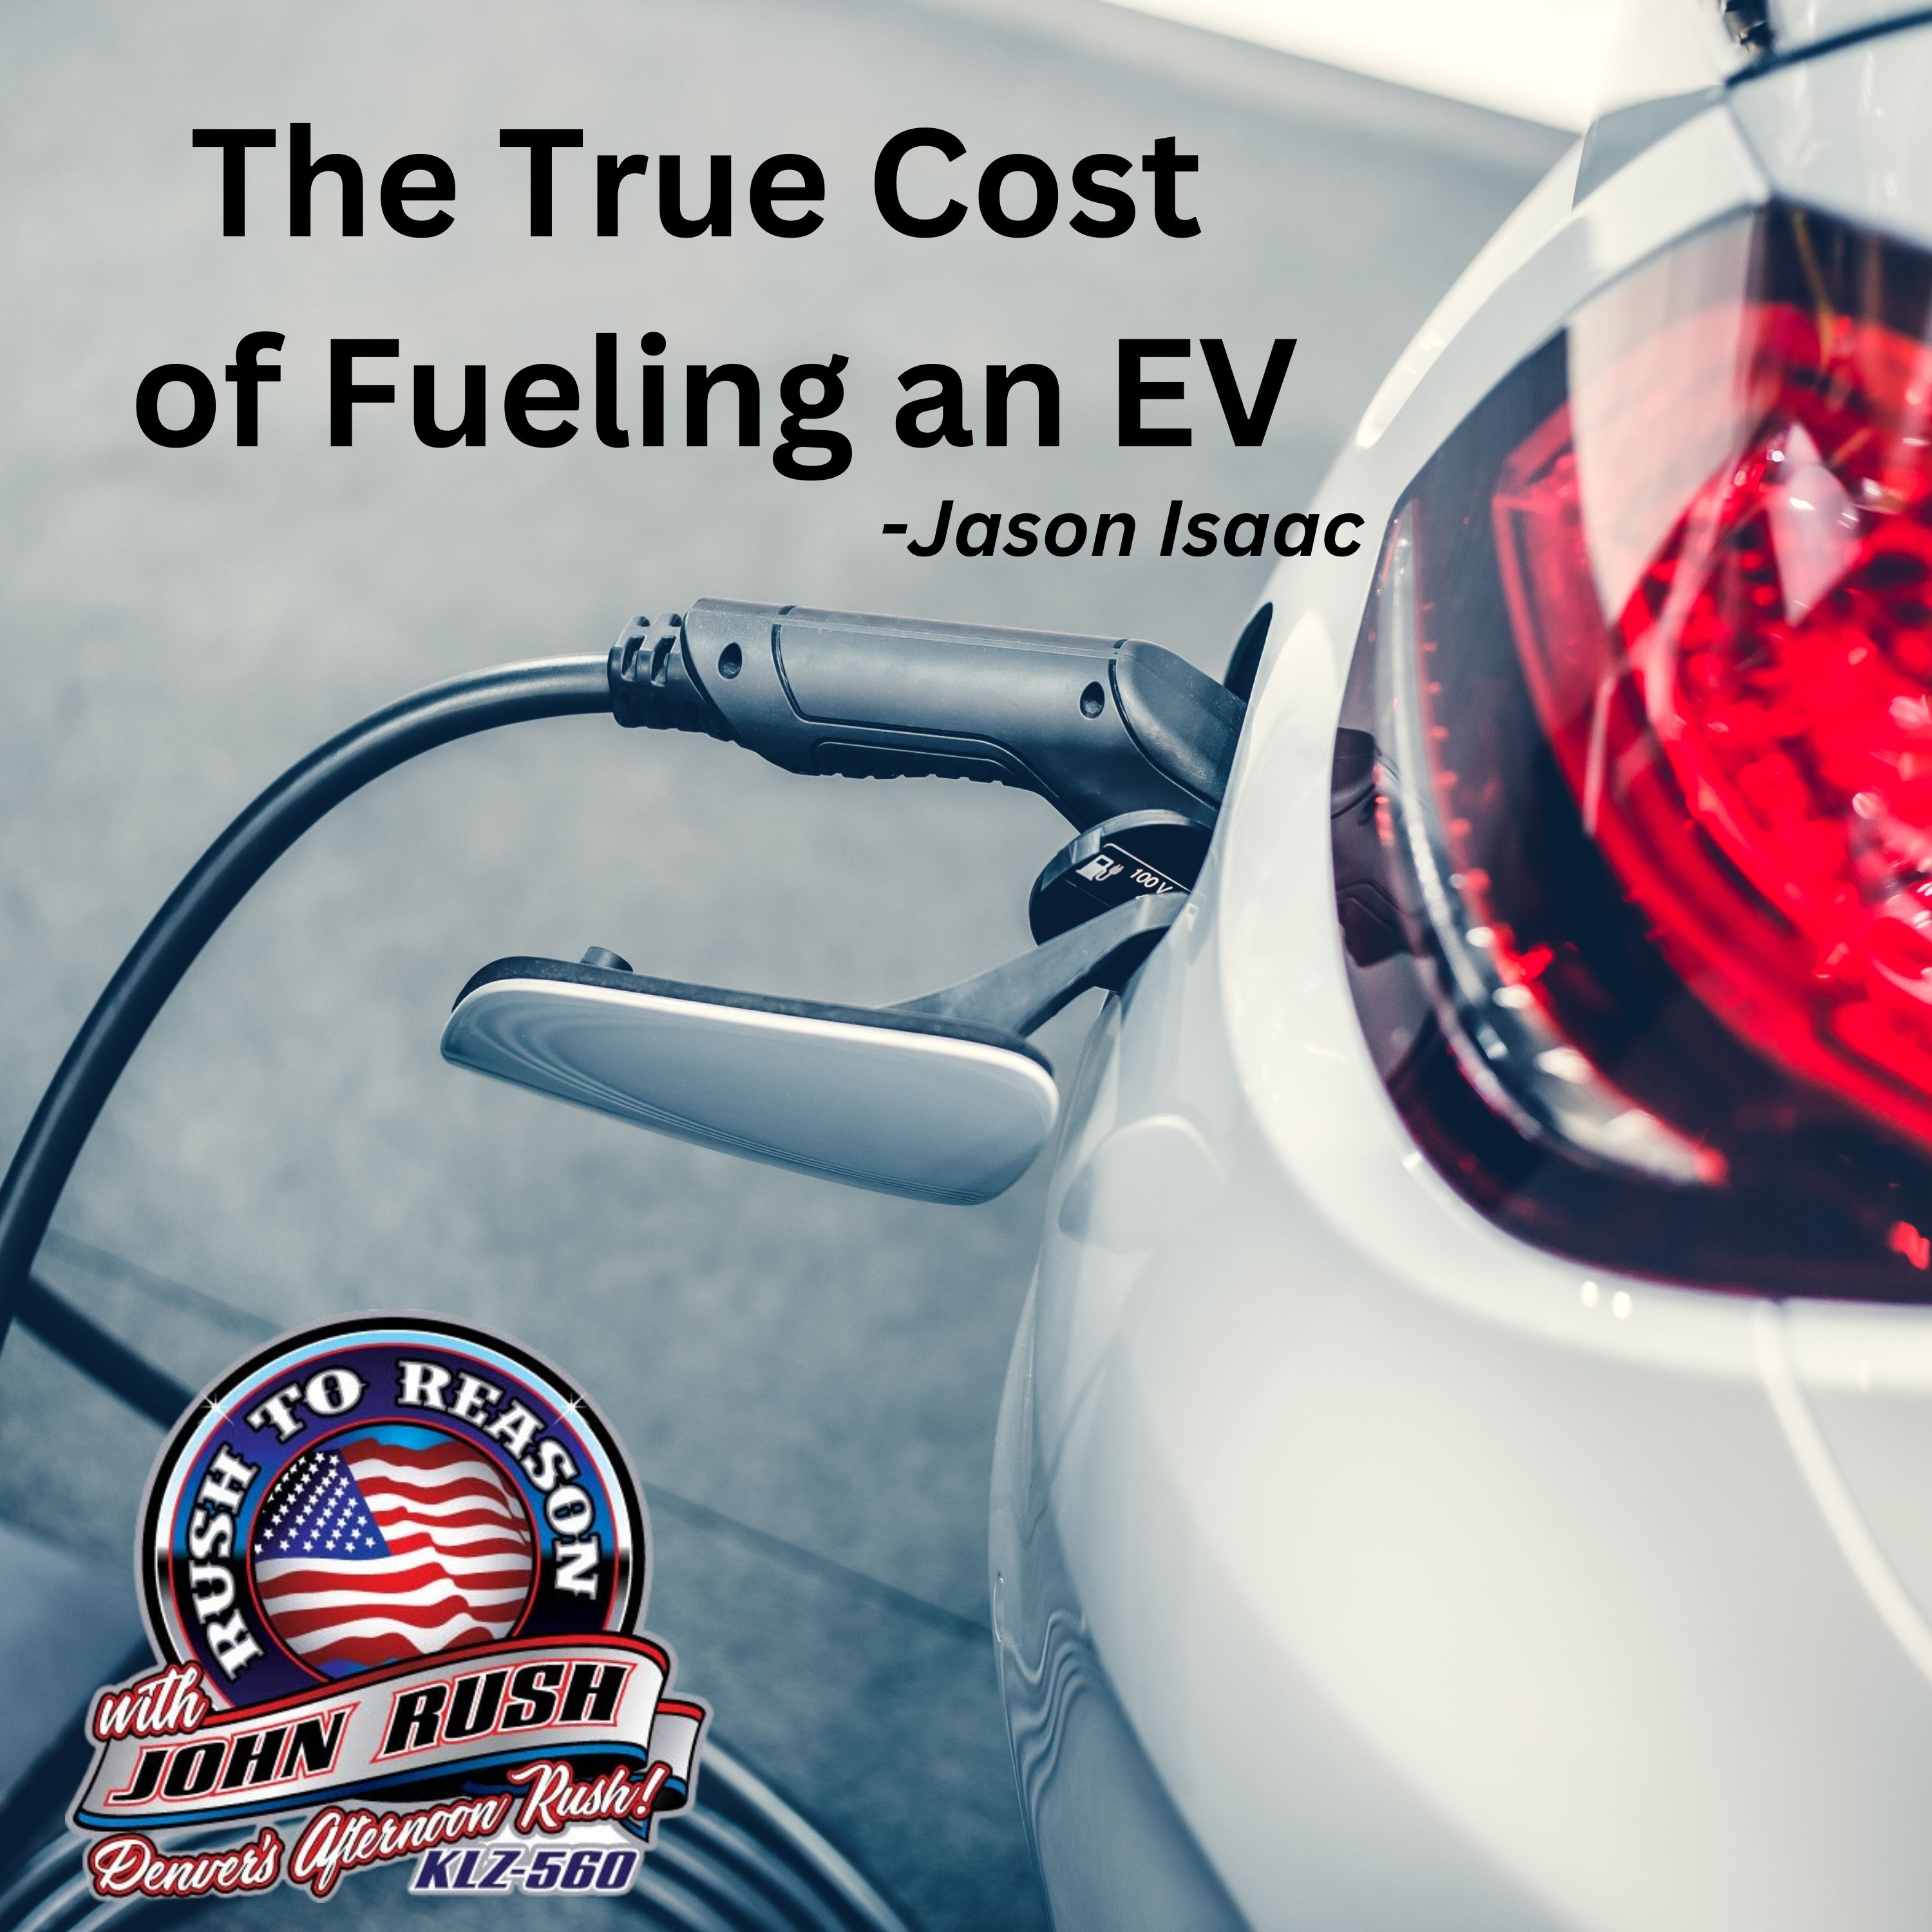 The True Cost of Fueling an EV - Jason Isaac, Founder of the American Energy Institute